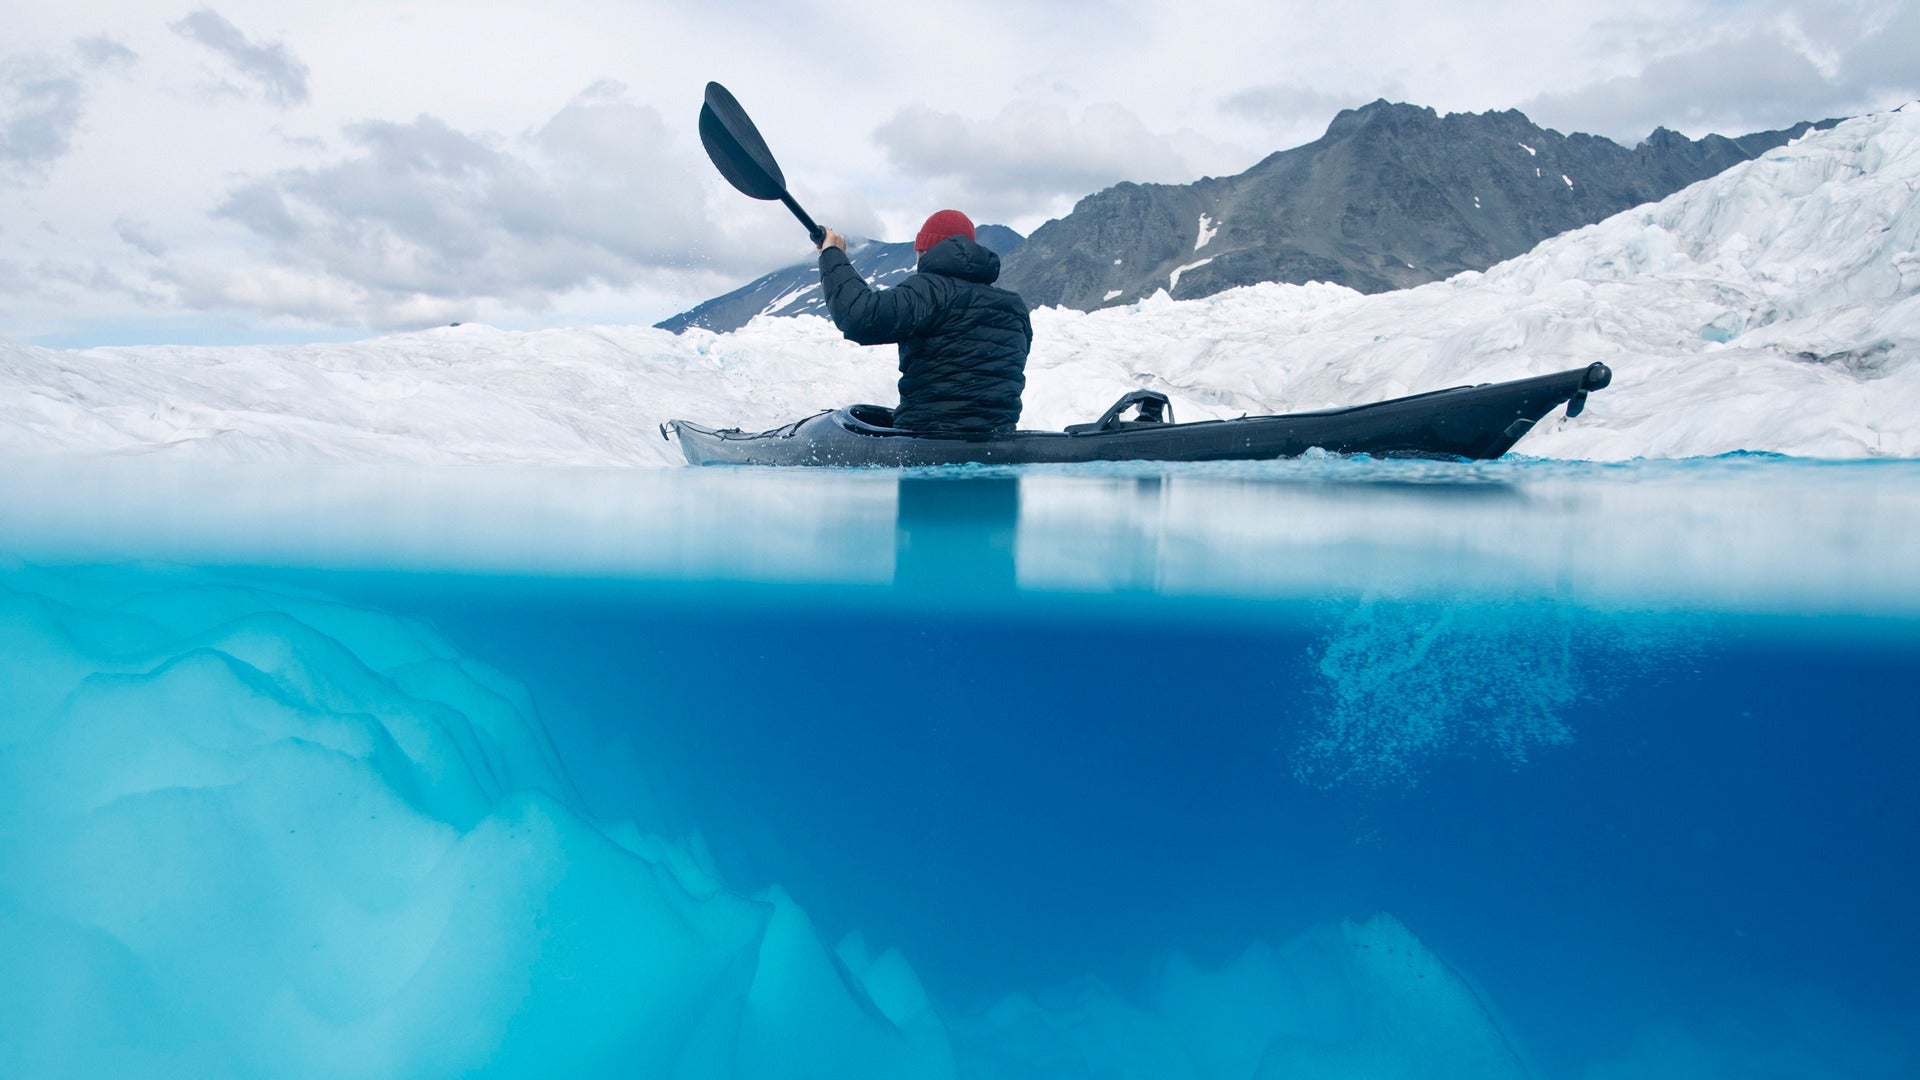 The importance of storytelling in photography with Alex Strohl - Pat Kay Blog